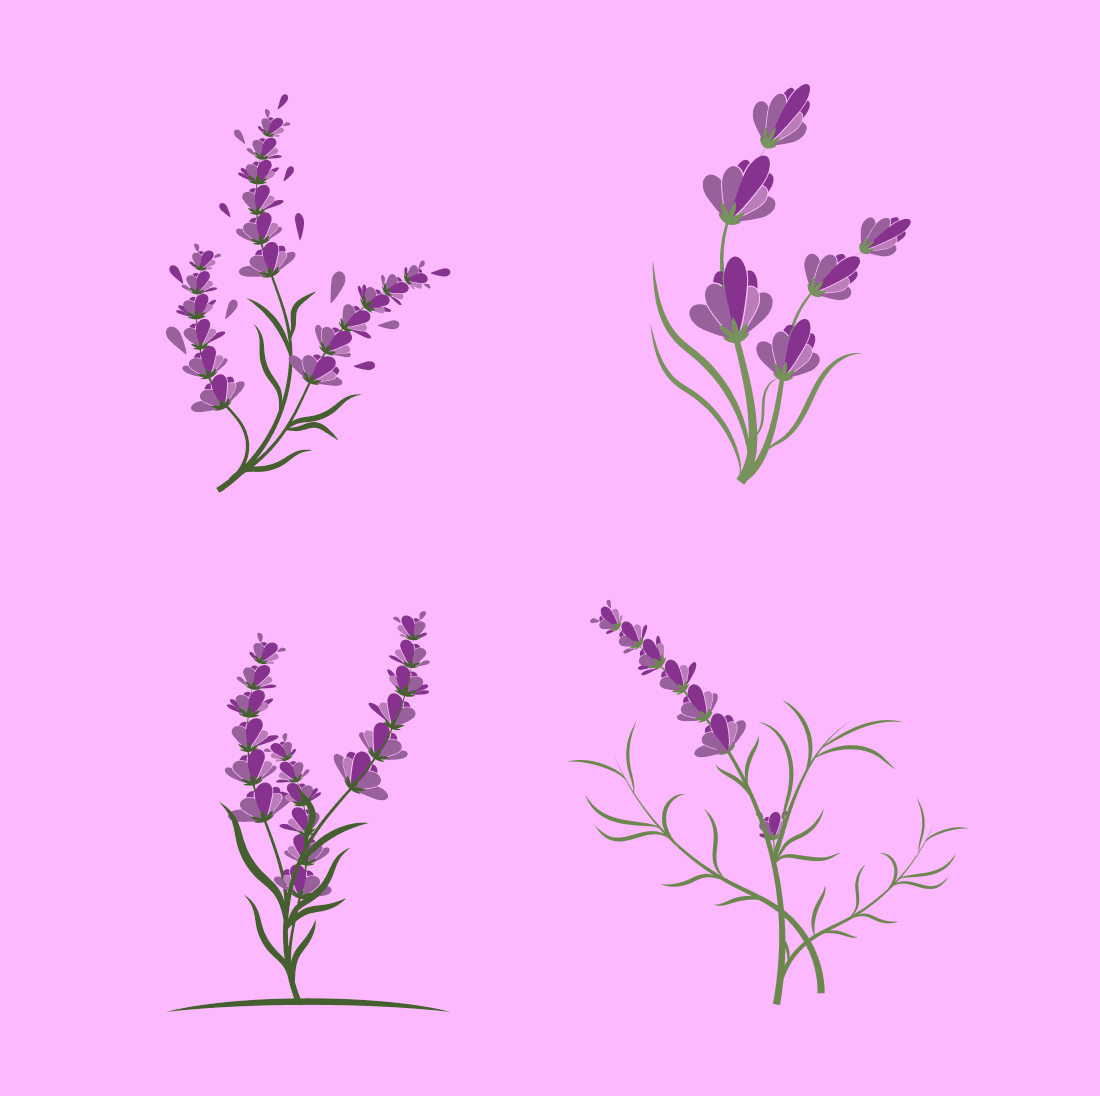 Lavender flowers with large and small flowers drawn on a pink background